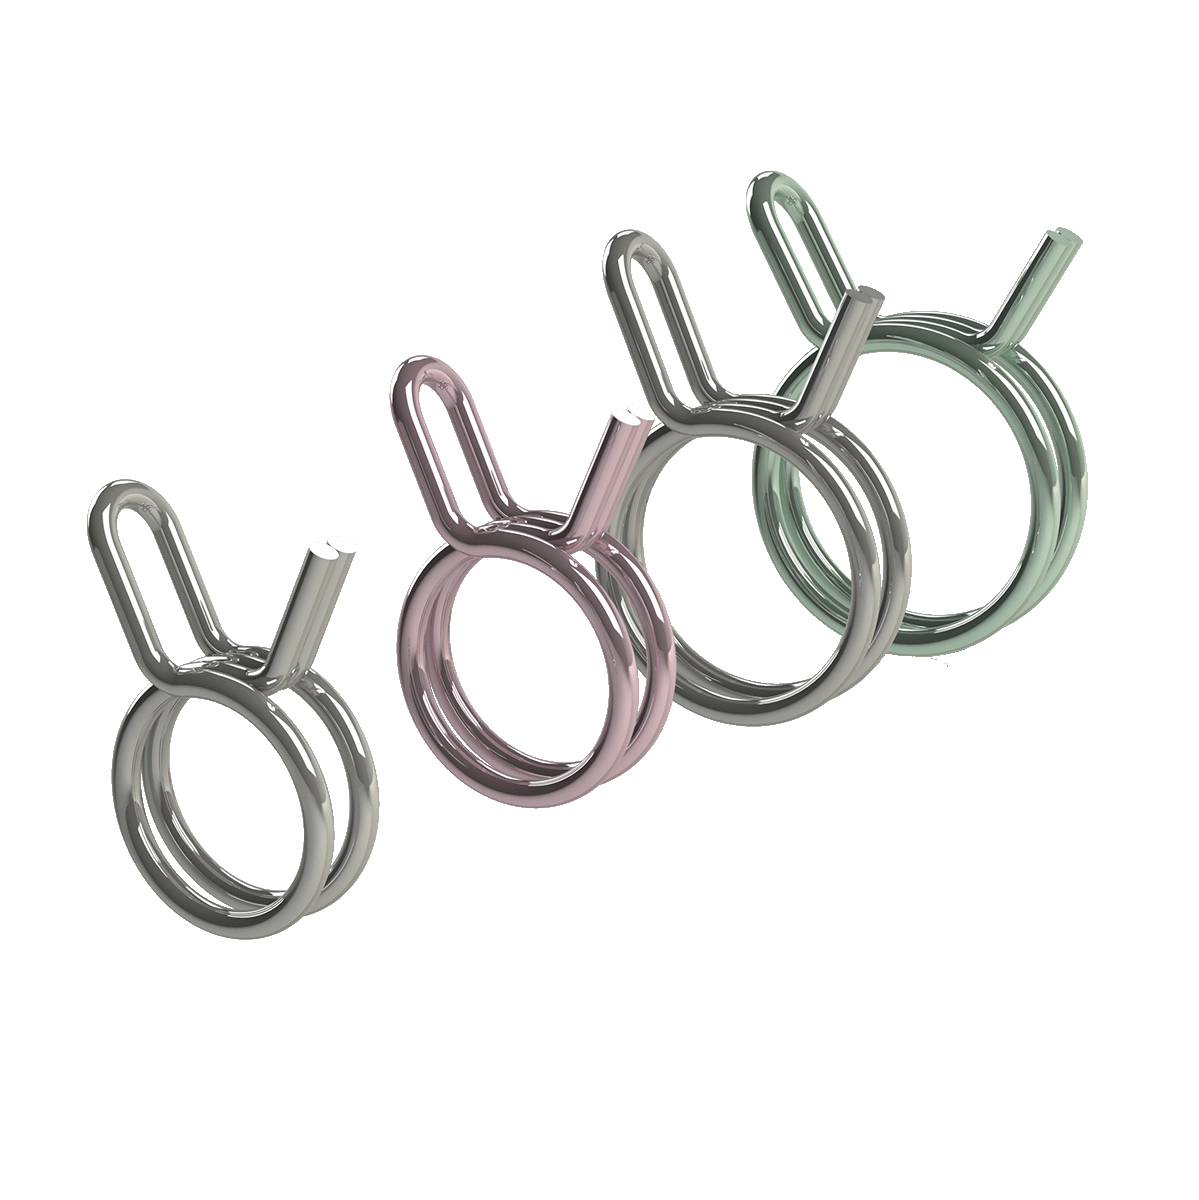 Group of hose clamp in different sizes